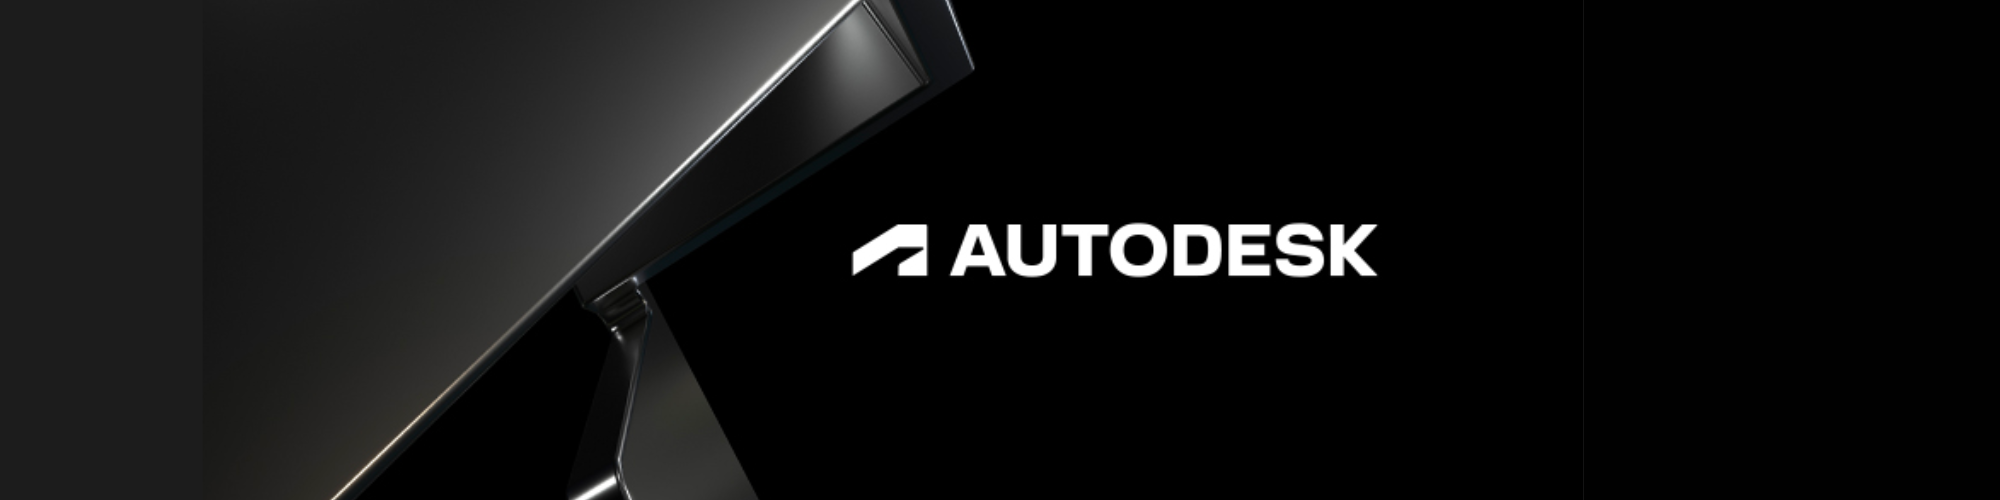 Autodesk cover image